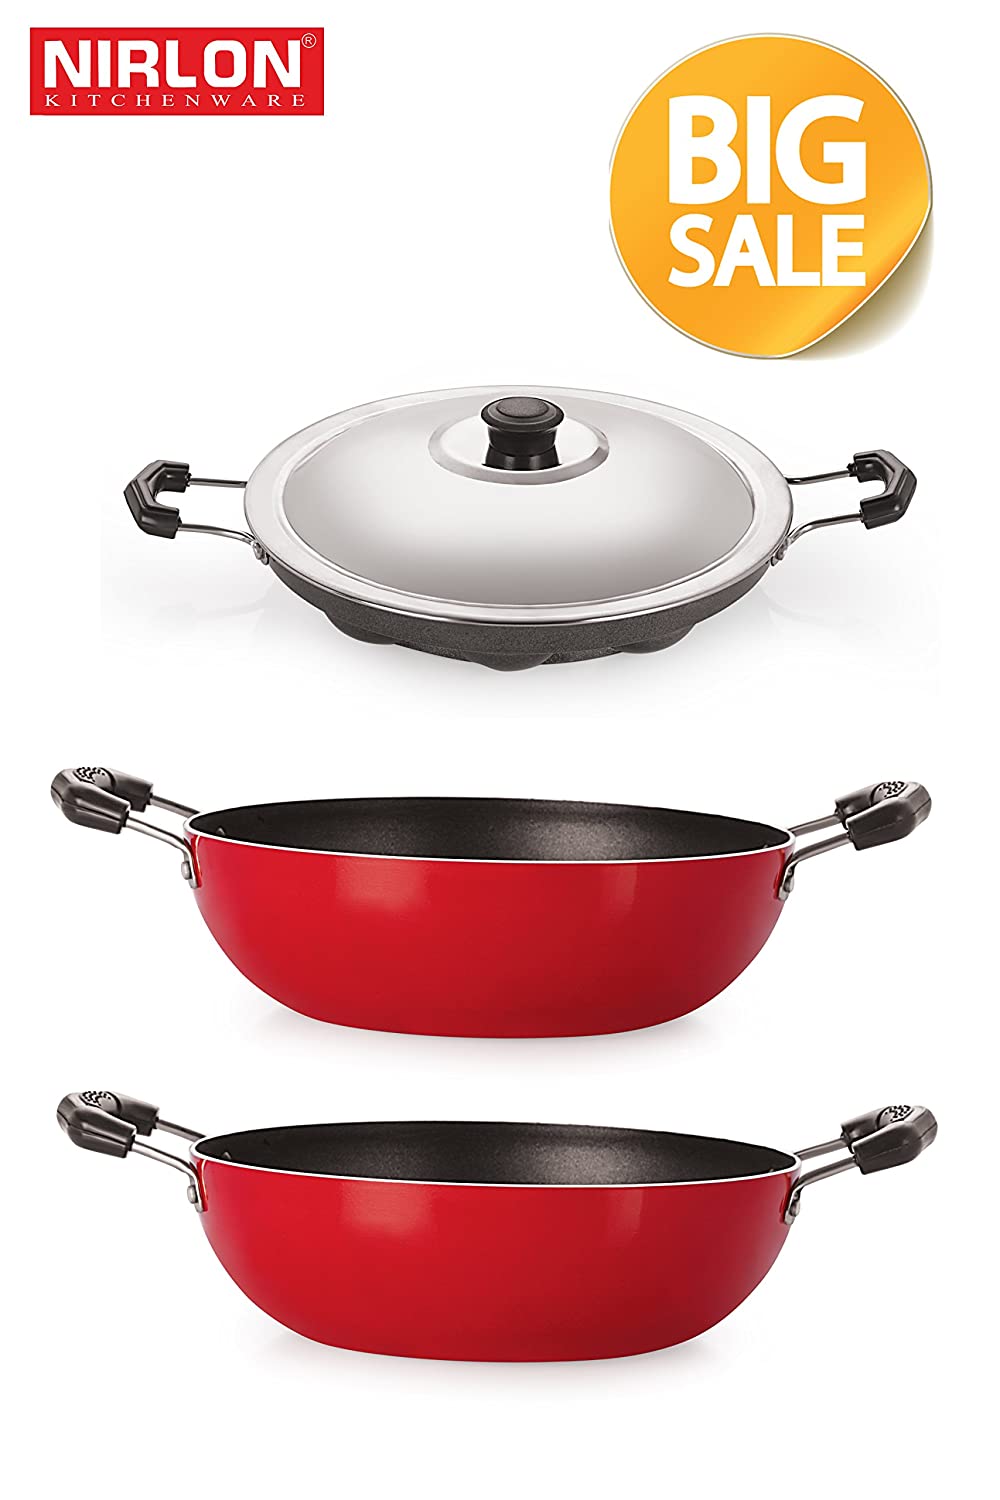 Enjoy Stress Free, Healthy Cooking, With Our Classic Range Of Cookware Sets   Kadai 1.5 Liter , Kadhai 2 Liter , Appam Patram With Stainless Steel Lid 12 Pites   PTFE Non Stick Exterior For Easy Cleaning  